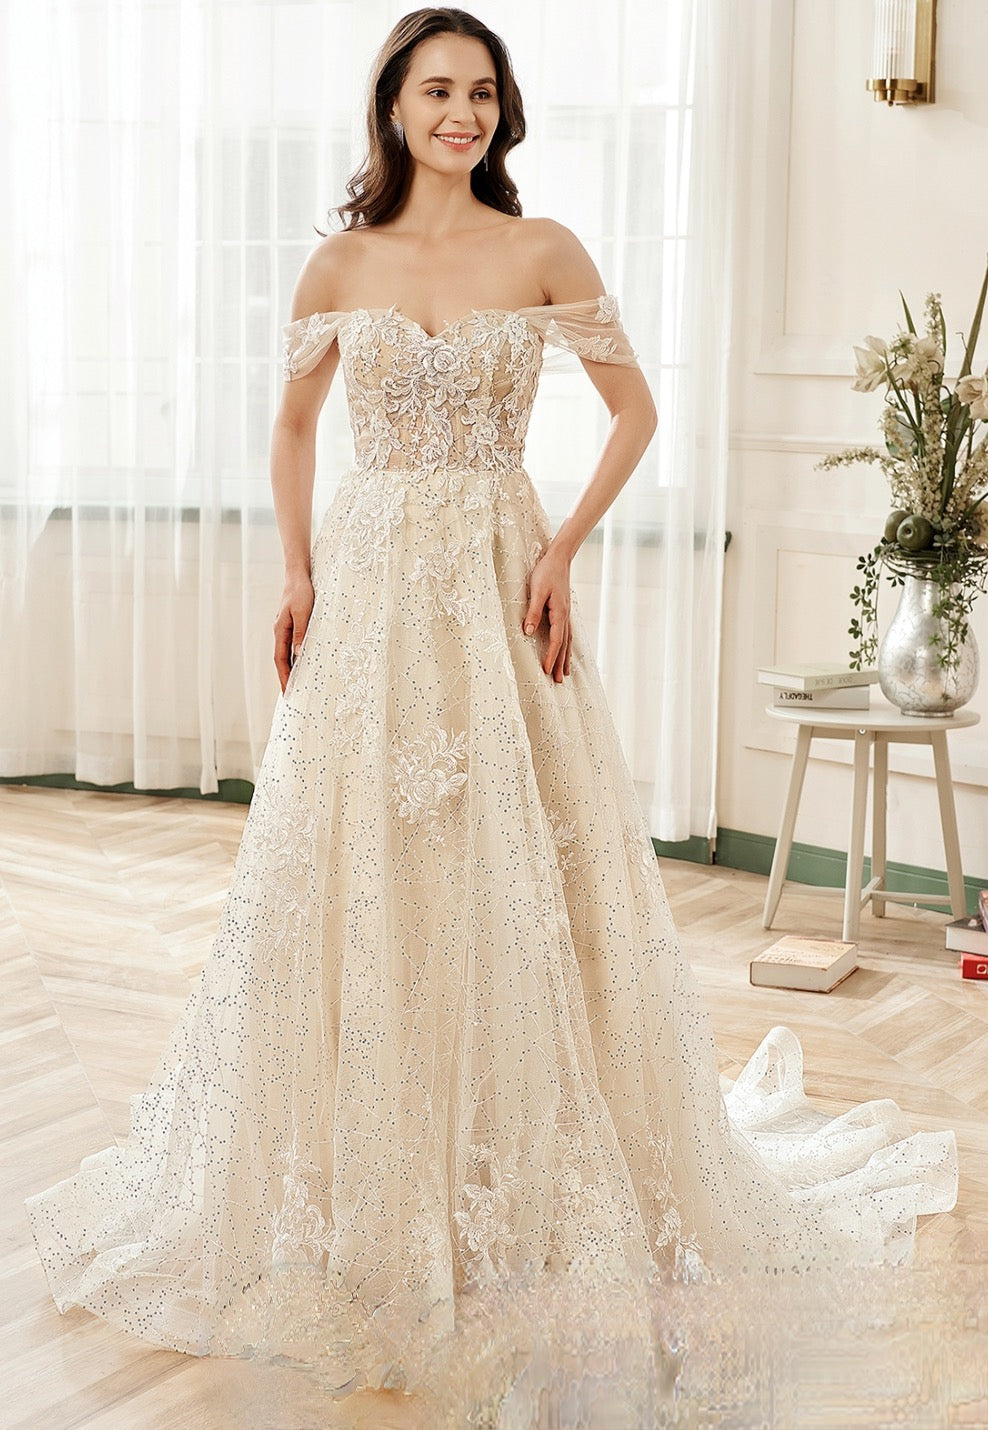 Sweet Floral Lace Strapless A-line Sheer Champagne Wedding Dress